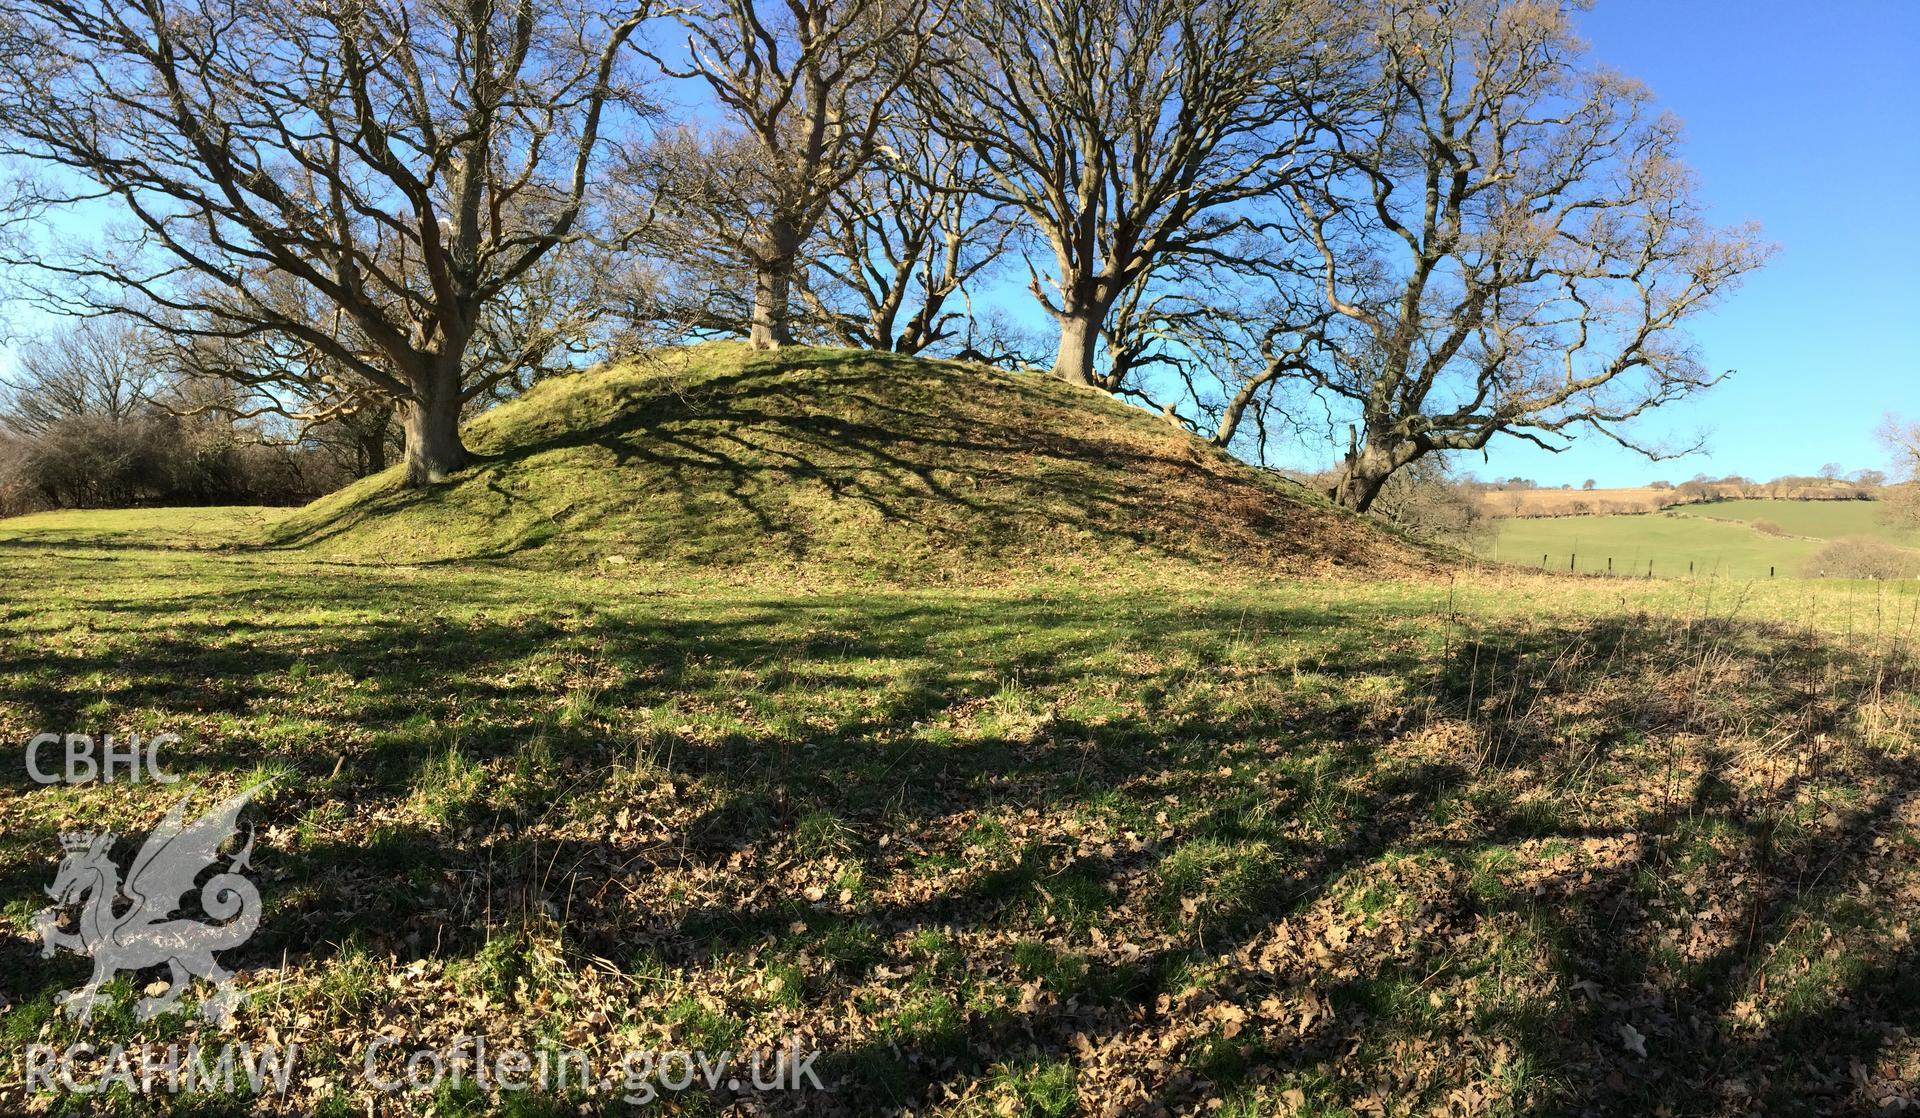 Colour photo showing view of Tal-y-cafn motte, taken by Paul R. Davis, 28th February 2018.